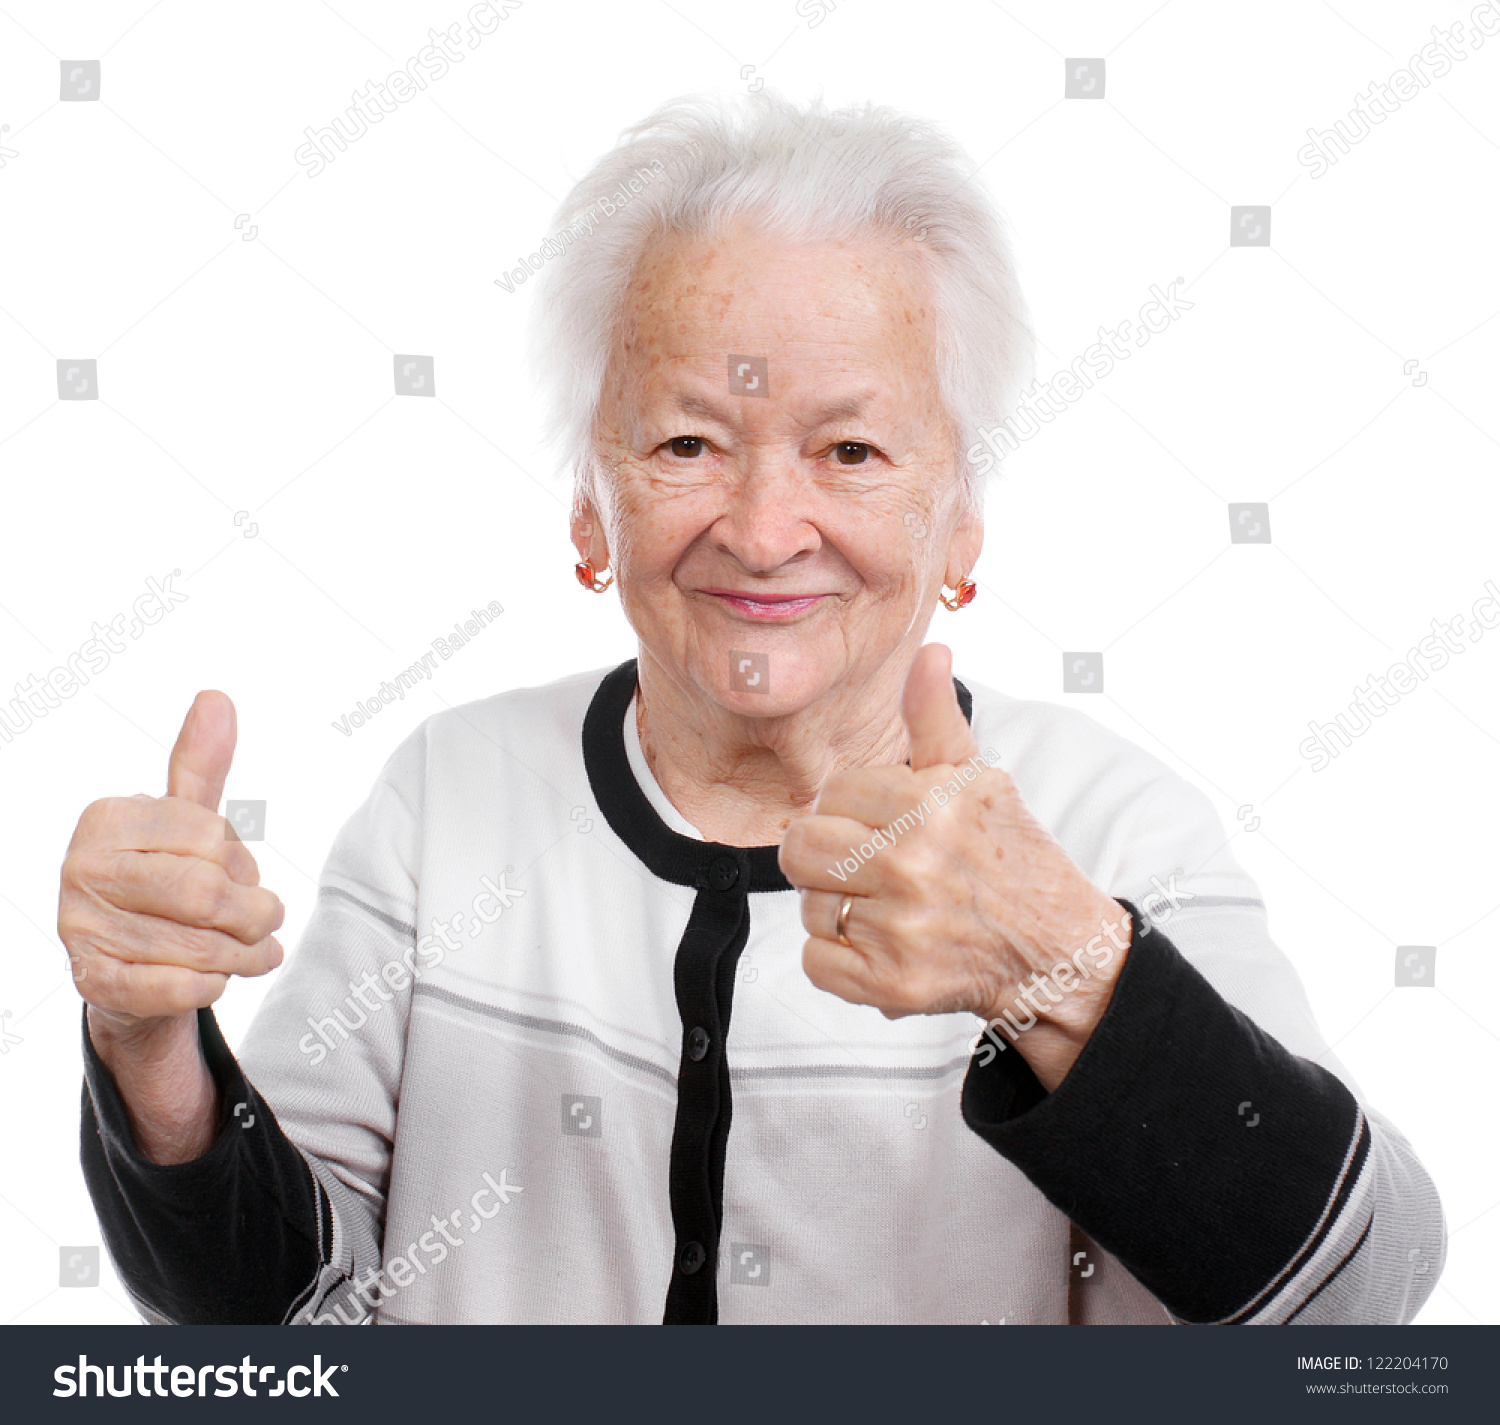 [Image: stock-photo-image-of-successful-old-woma...204170.jpg]